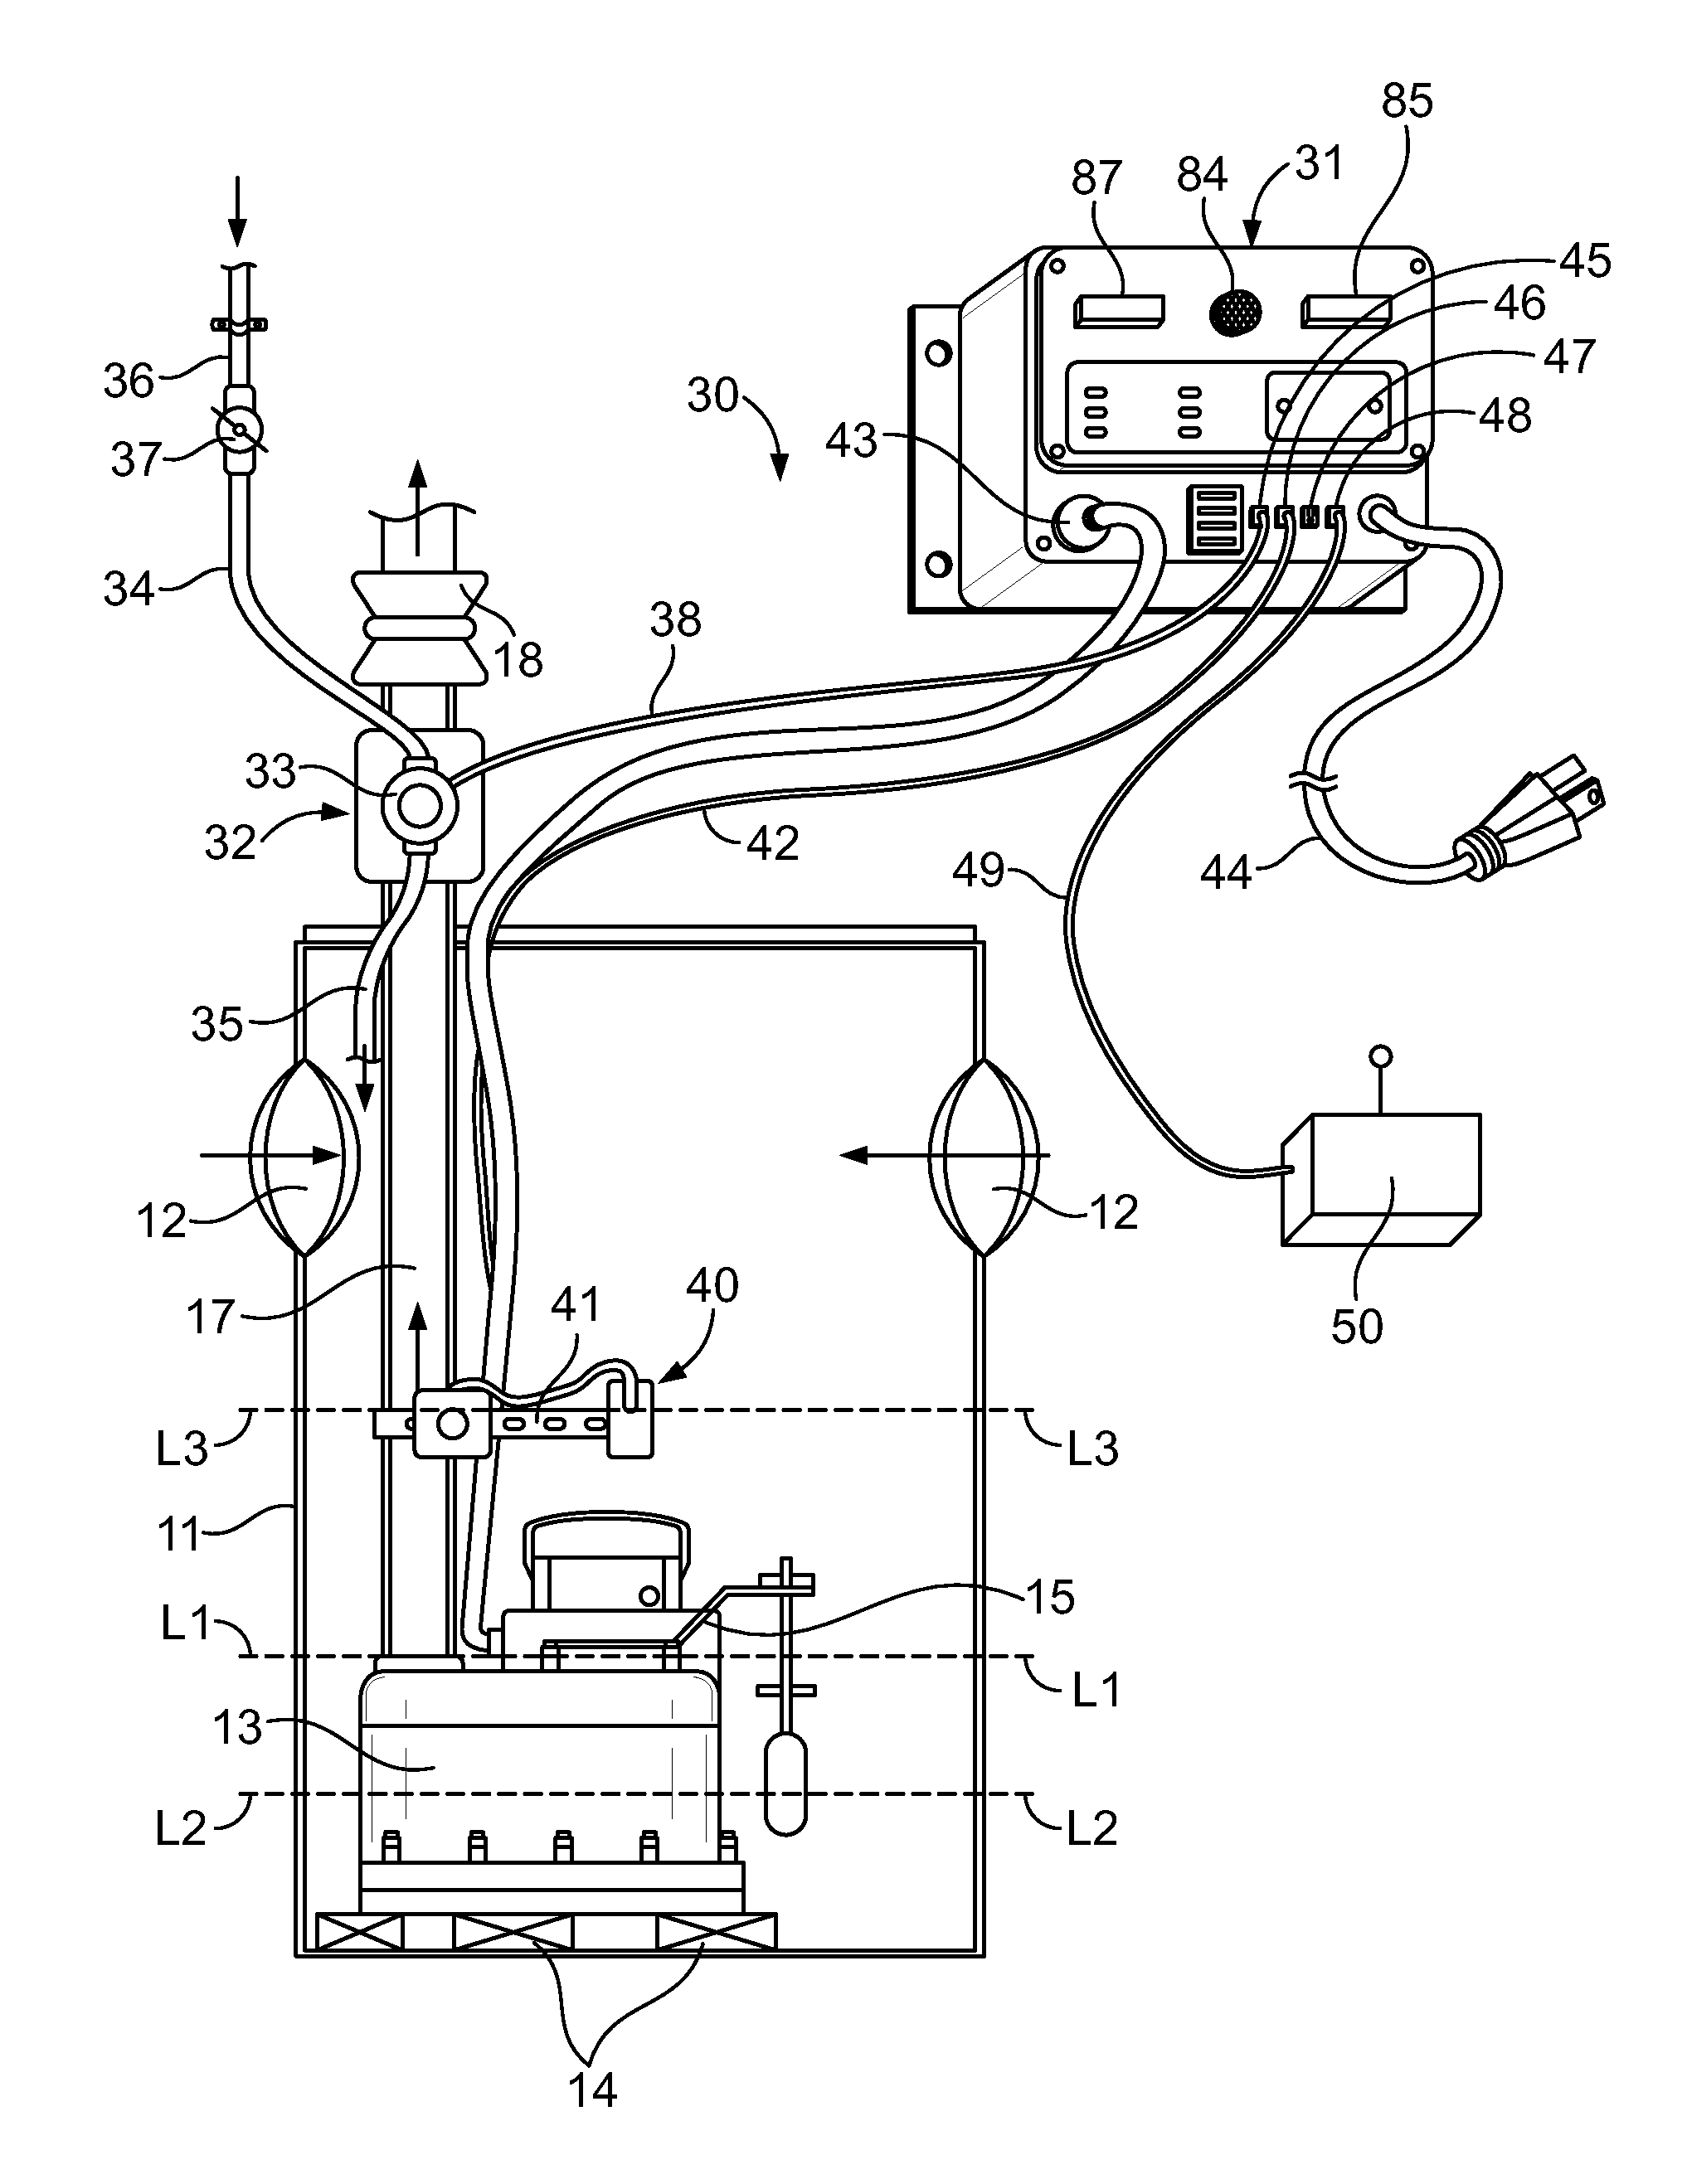 Test and monitoring system for a dual sump pump system